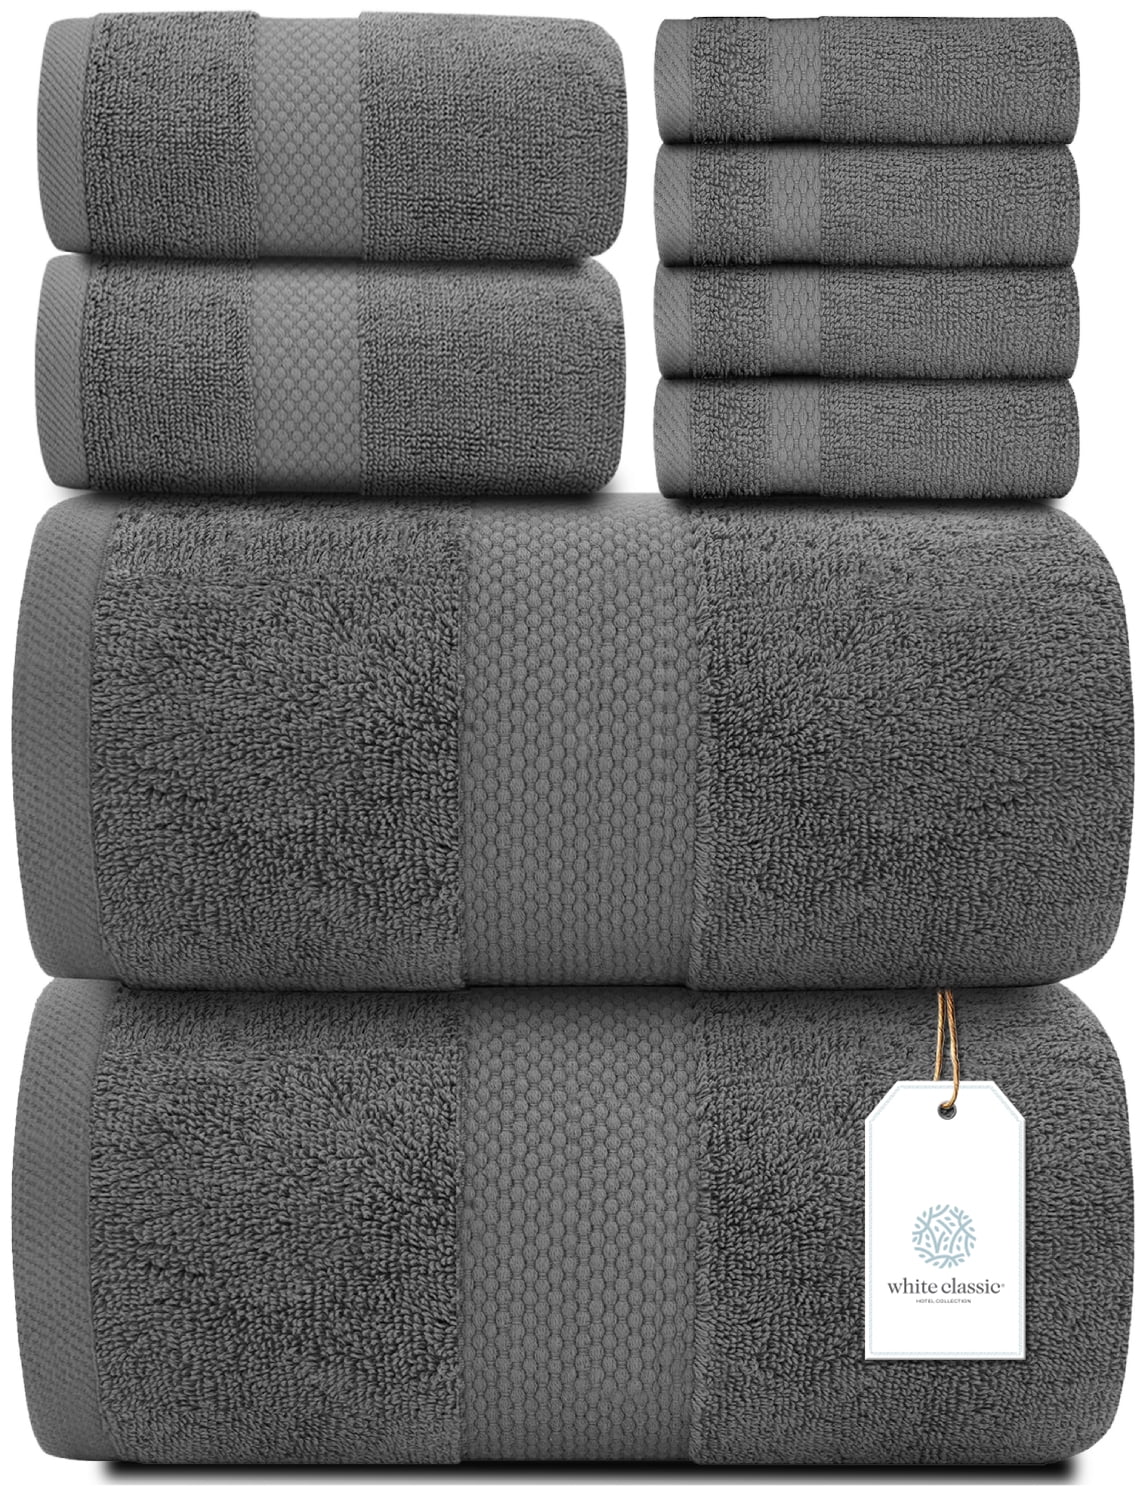 BedVoyage Luxury Viscose from Bamboo Towel Set 8pc - White